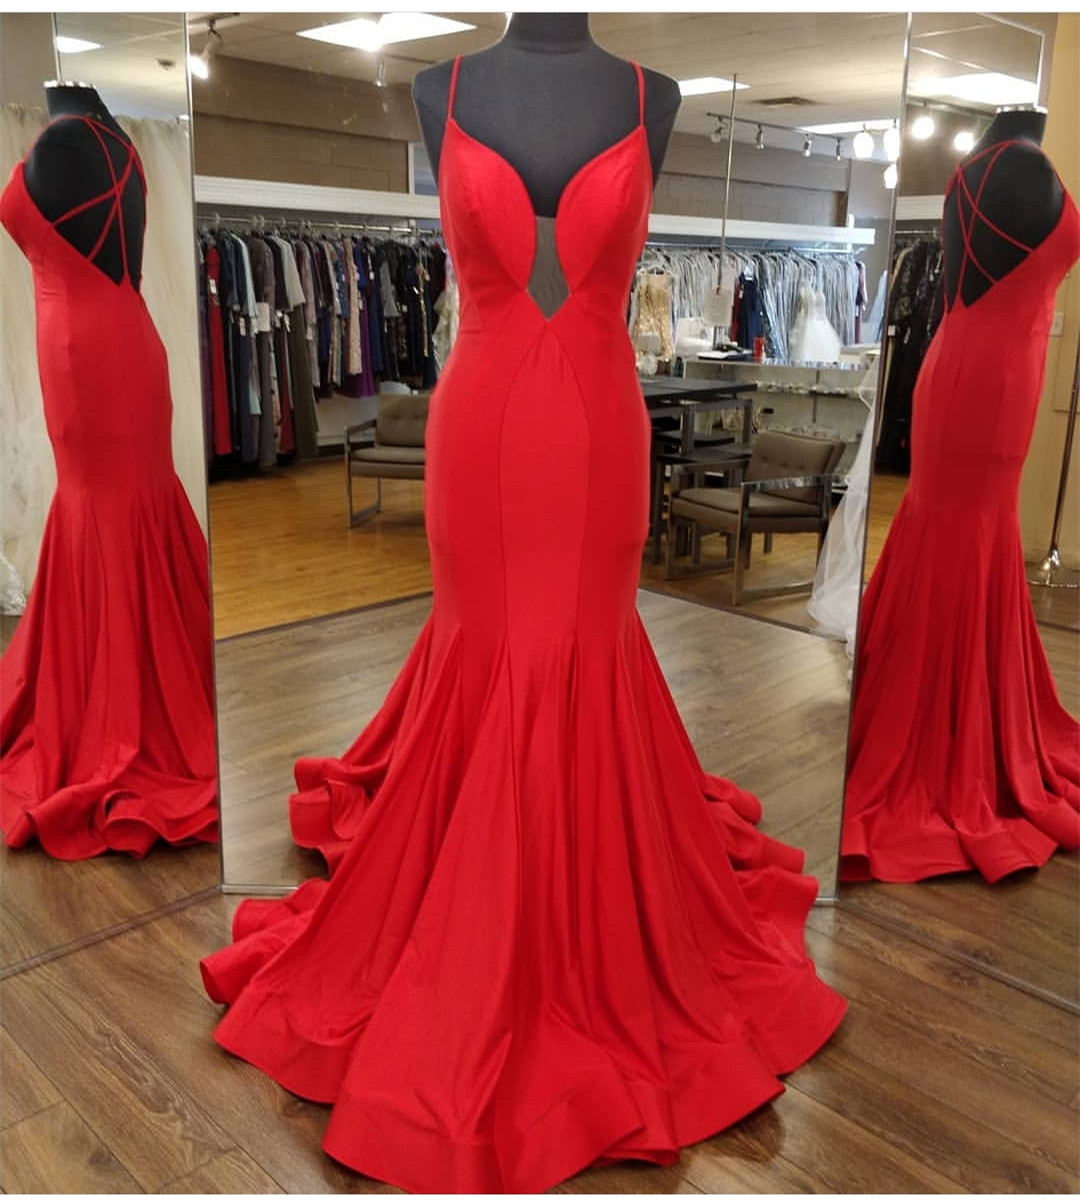 Red Prom Dresses Evening Gowns With Strappy Back